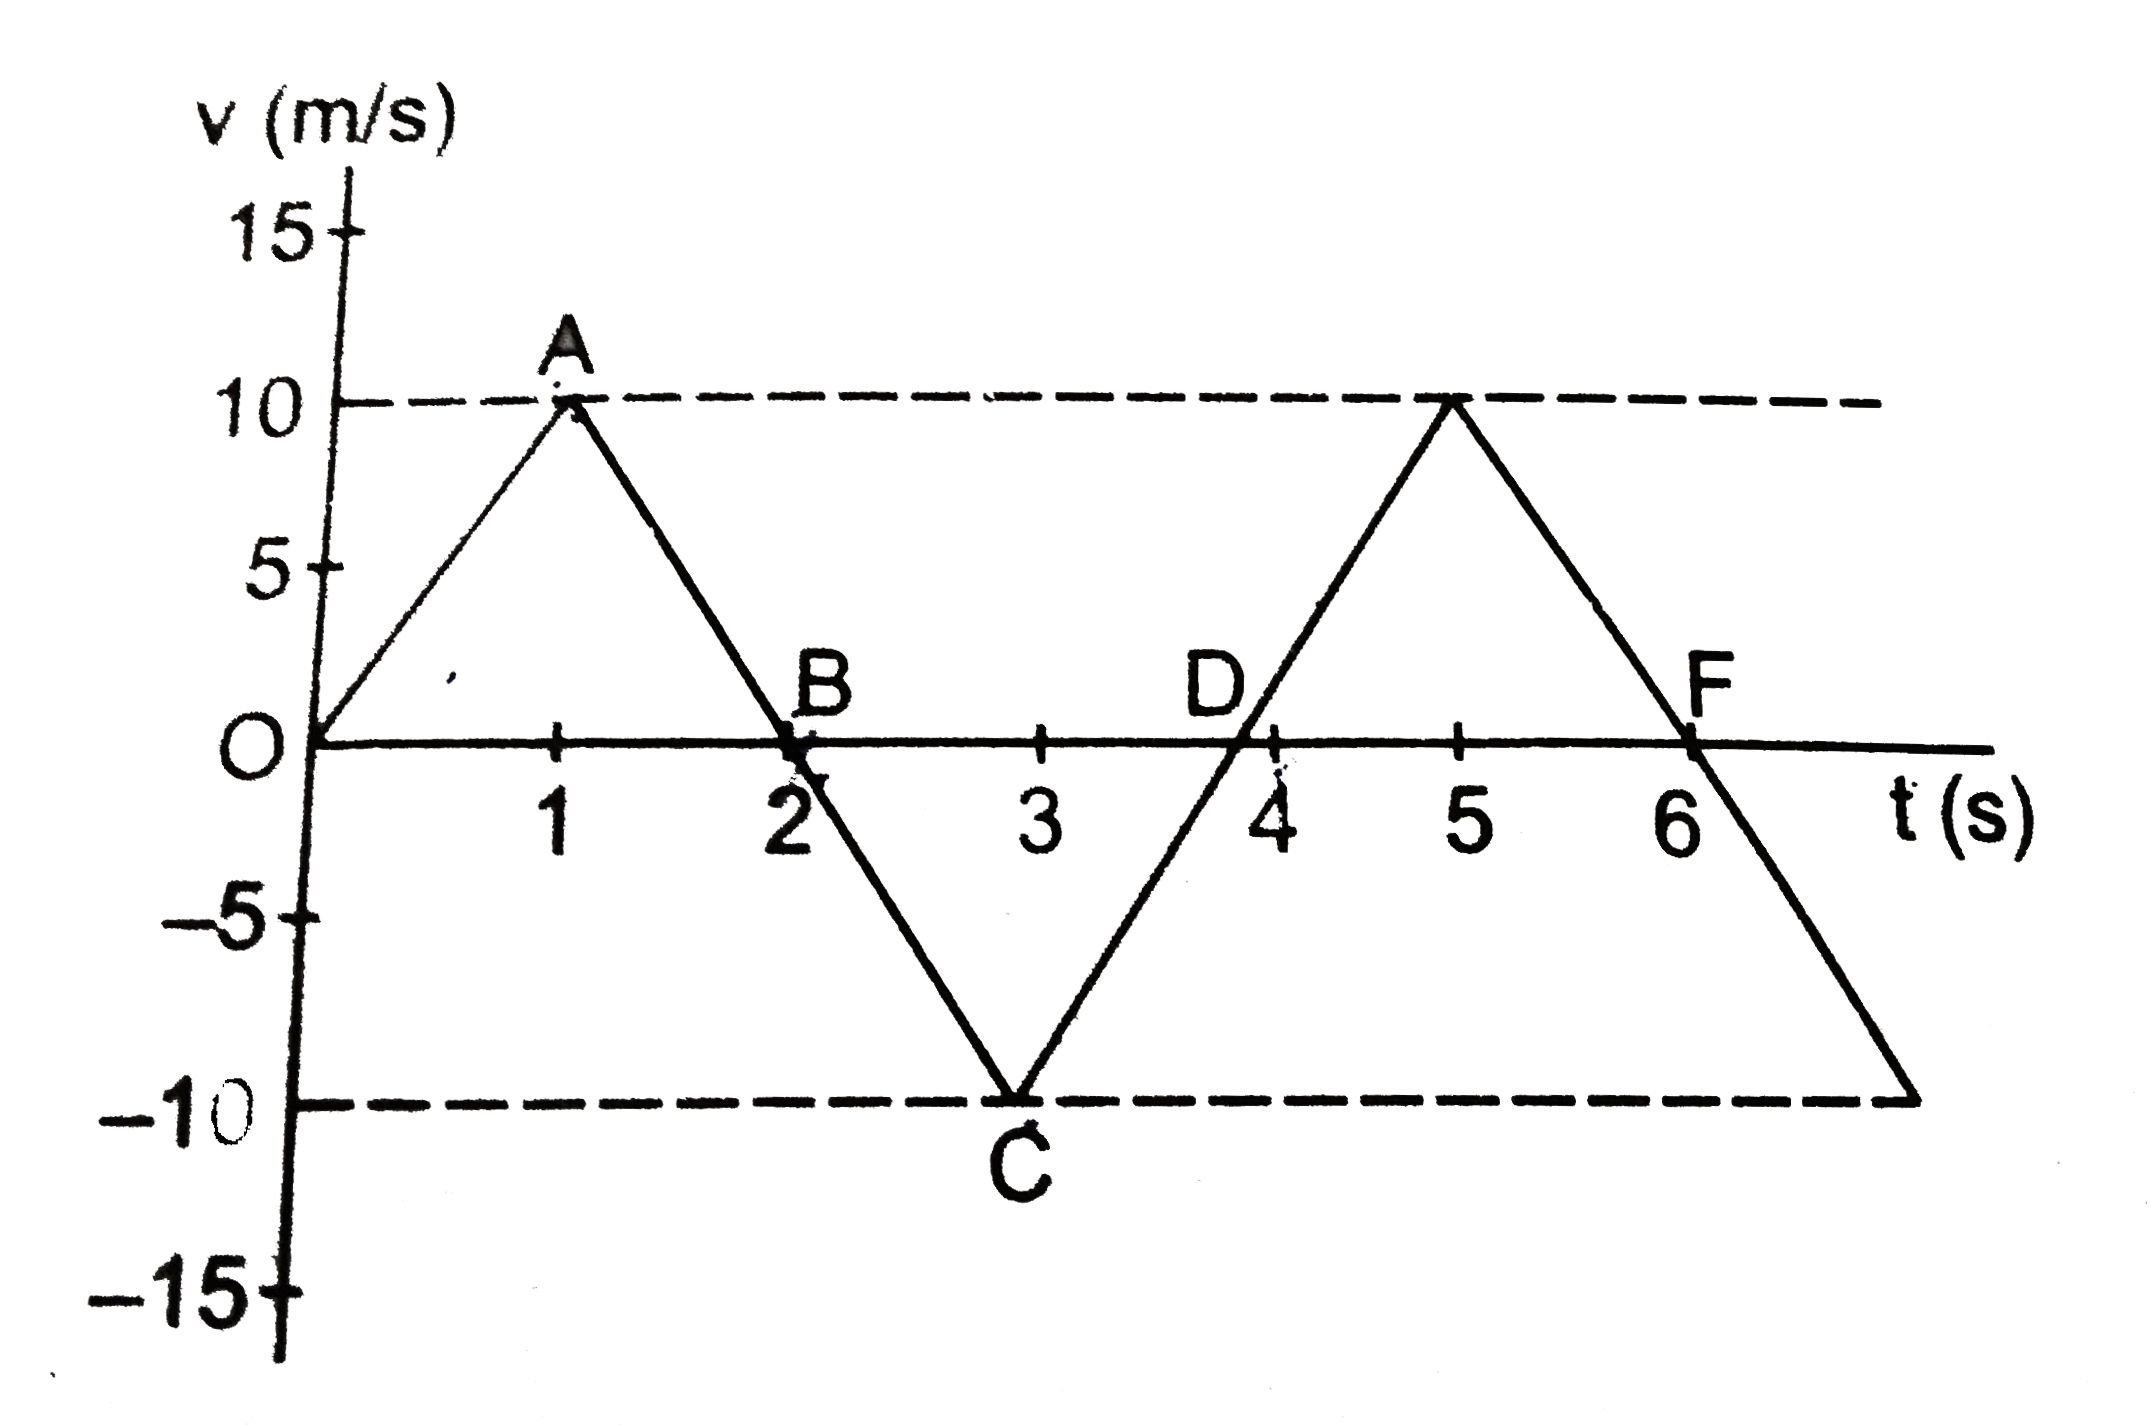 From the veloicty time graph of a particle given in figure describe the motion of the particle qualitively int eh interval 0 to 4s. Find a. the distance travelled during first two seconds, b. during the time 2s to 4s, c. during the time 0 to 4s d. displacement during 0 to 4 s. e. acceleration at t=1/2 and f. acceleration at t=2s   .